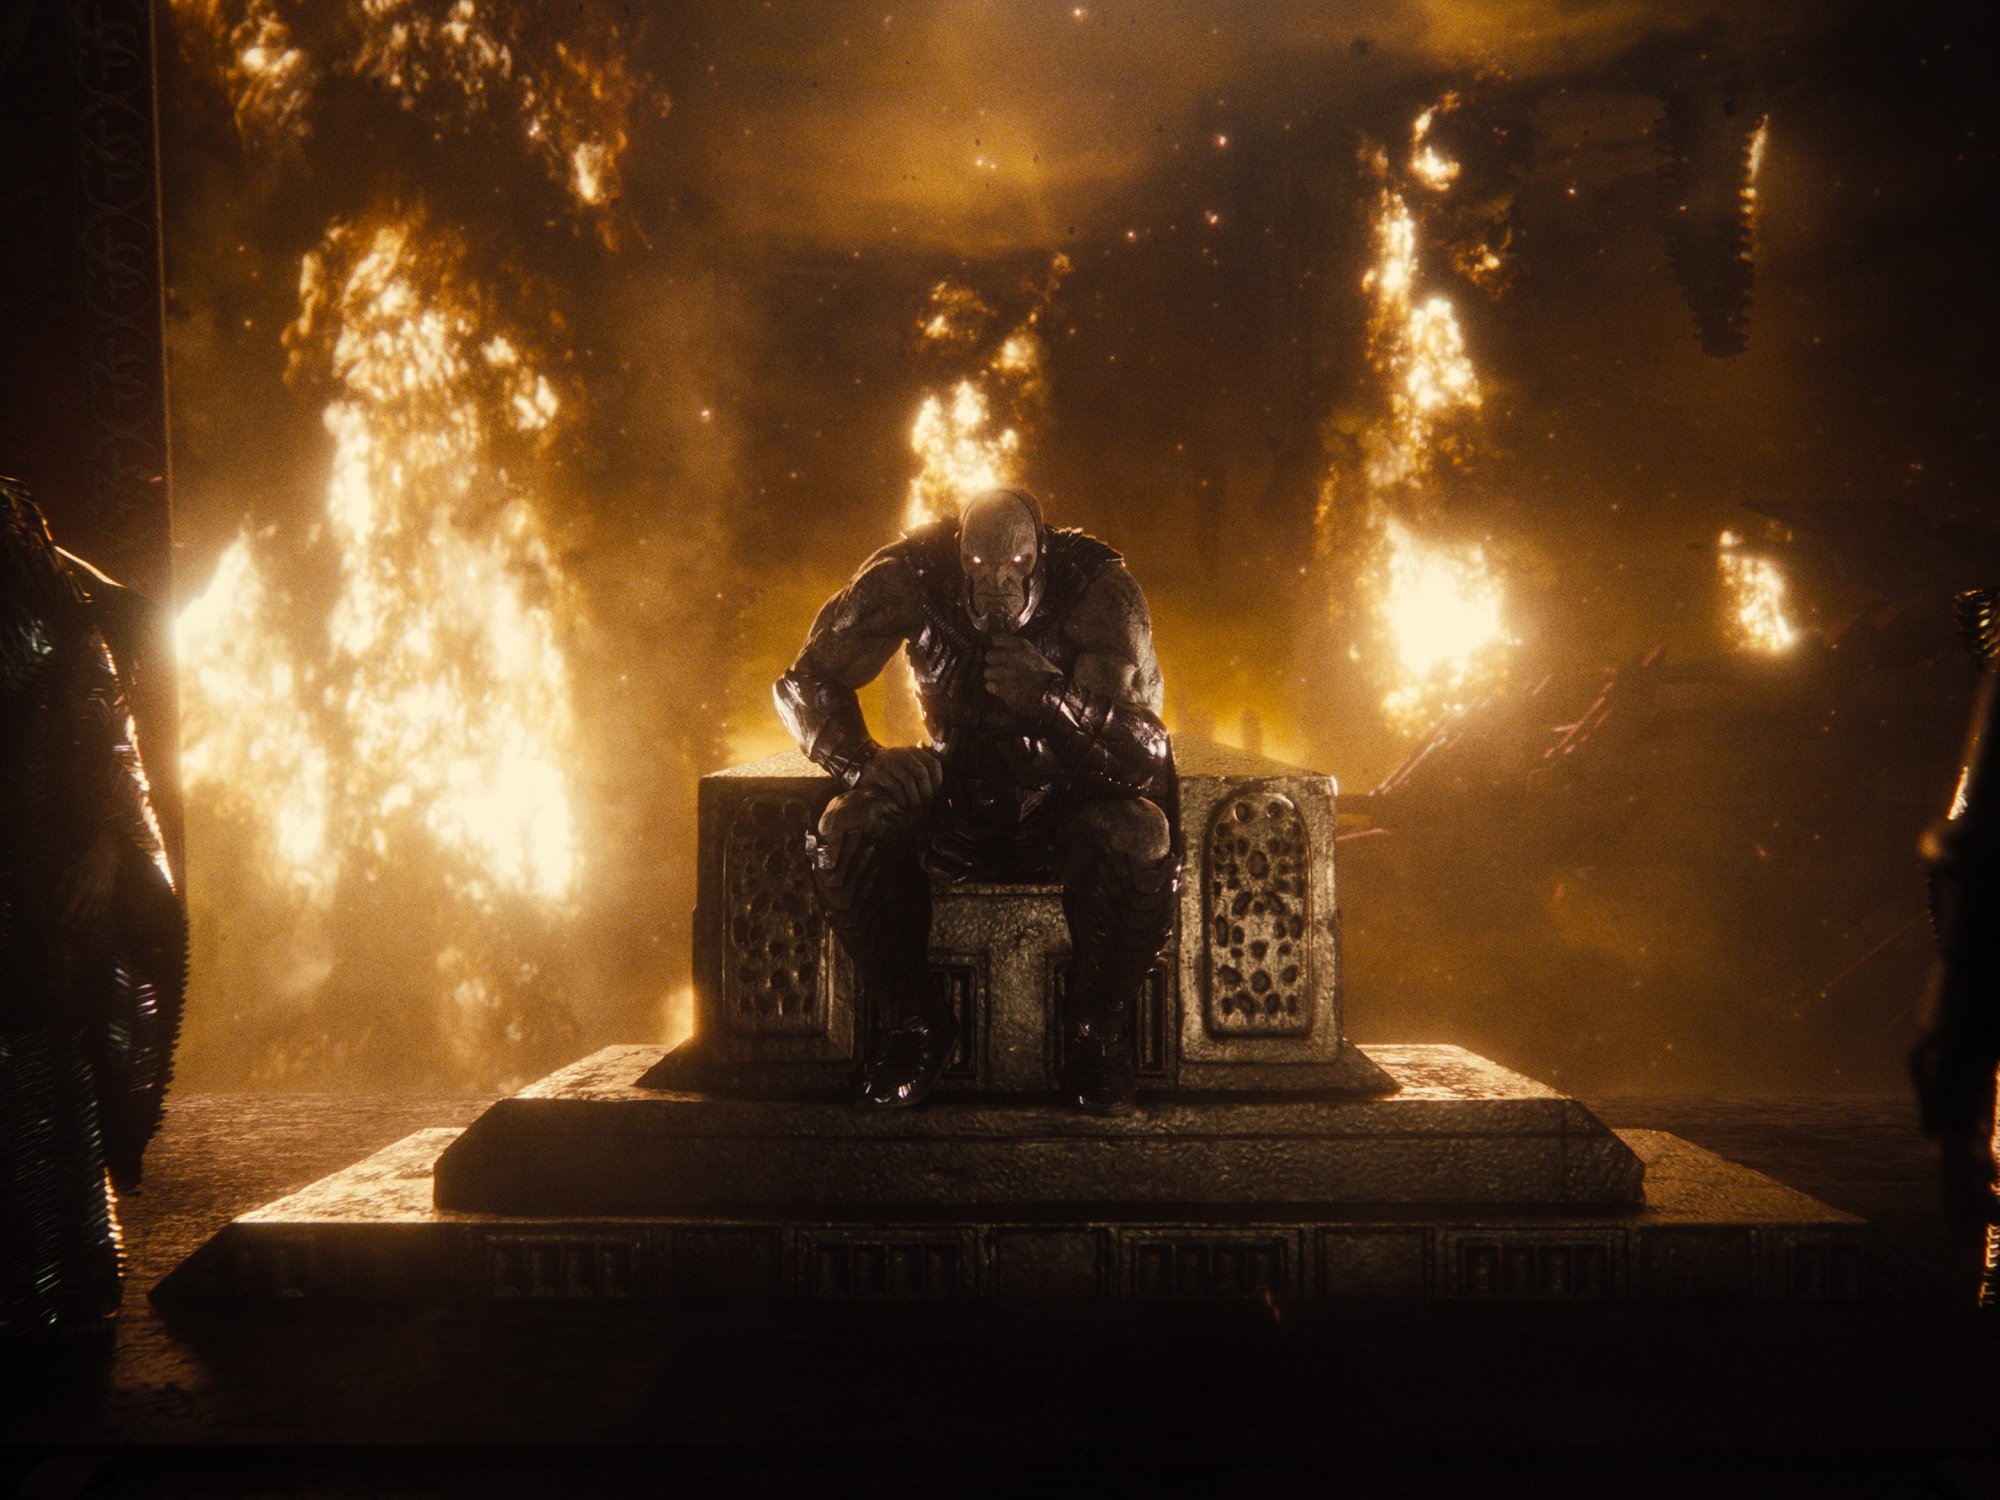 Zack Snyder's Justice League: Darkseid sits amid flames